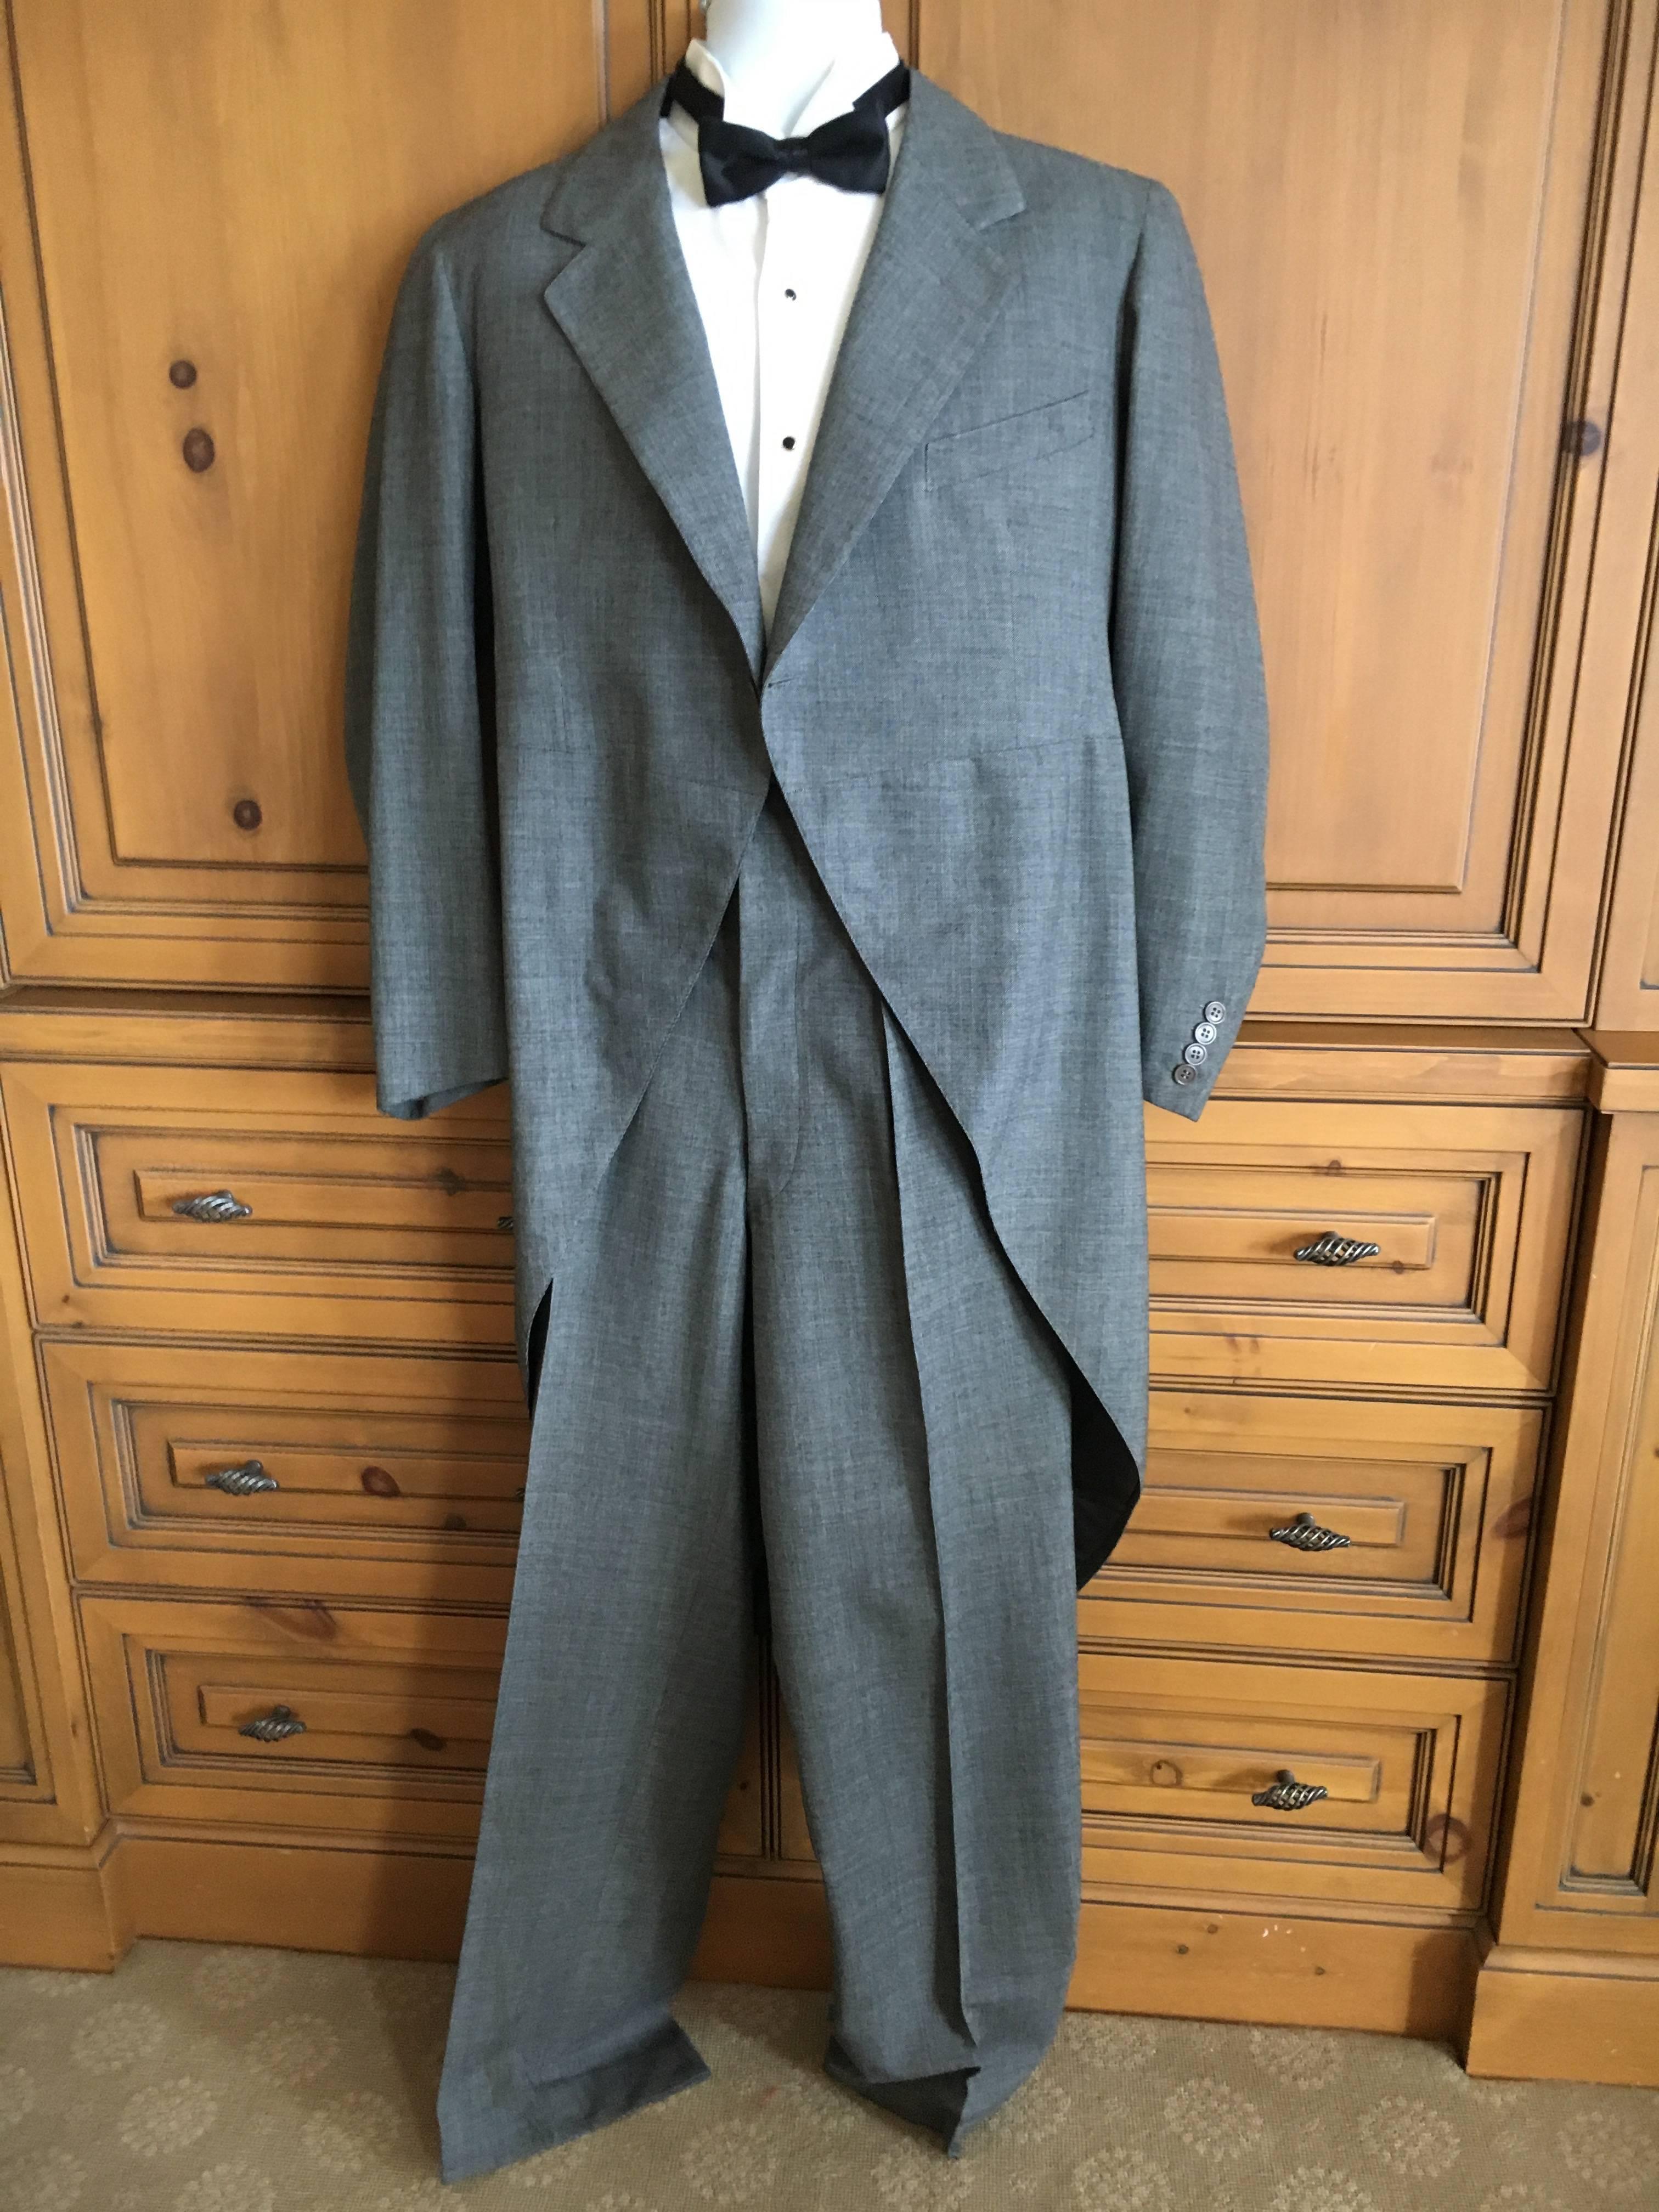 Wonderful summer weight light gray wool formal suit from F.L. Dunne & Co.
F.L. Dunne & Co. was a society tailor in NY and Boston, discreetly tailoring suiting and formal wear for  high society for almost century.
The owner was a polo playing